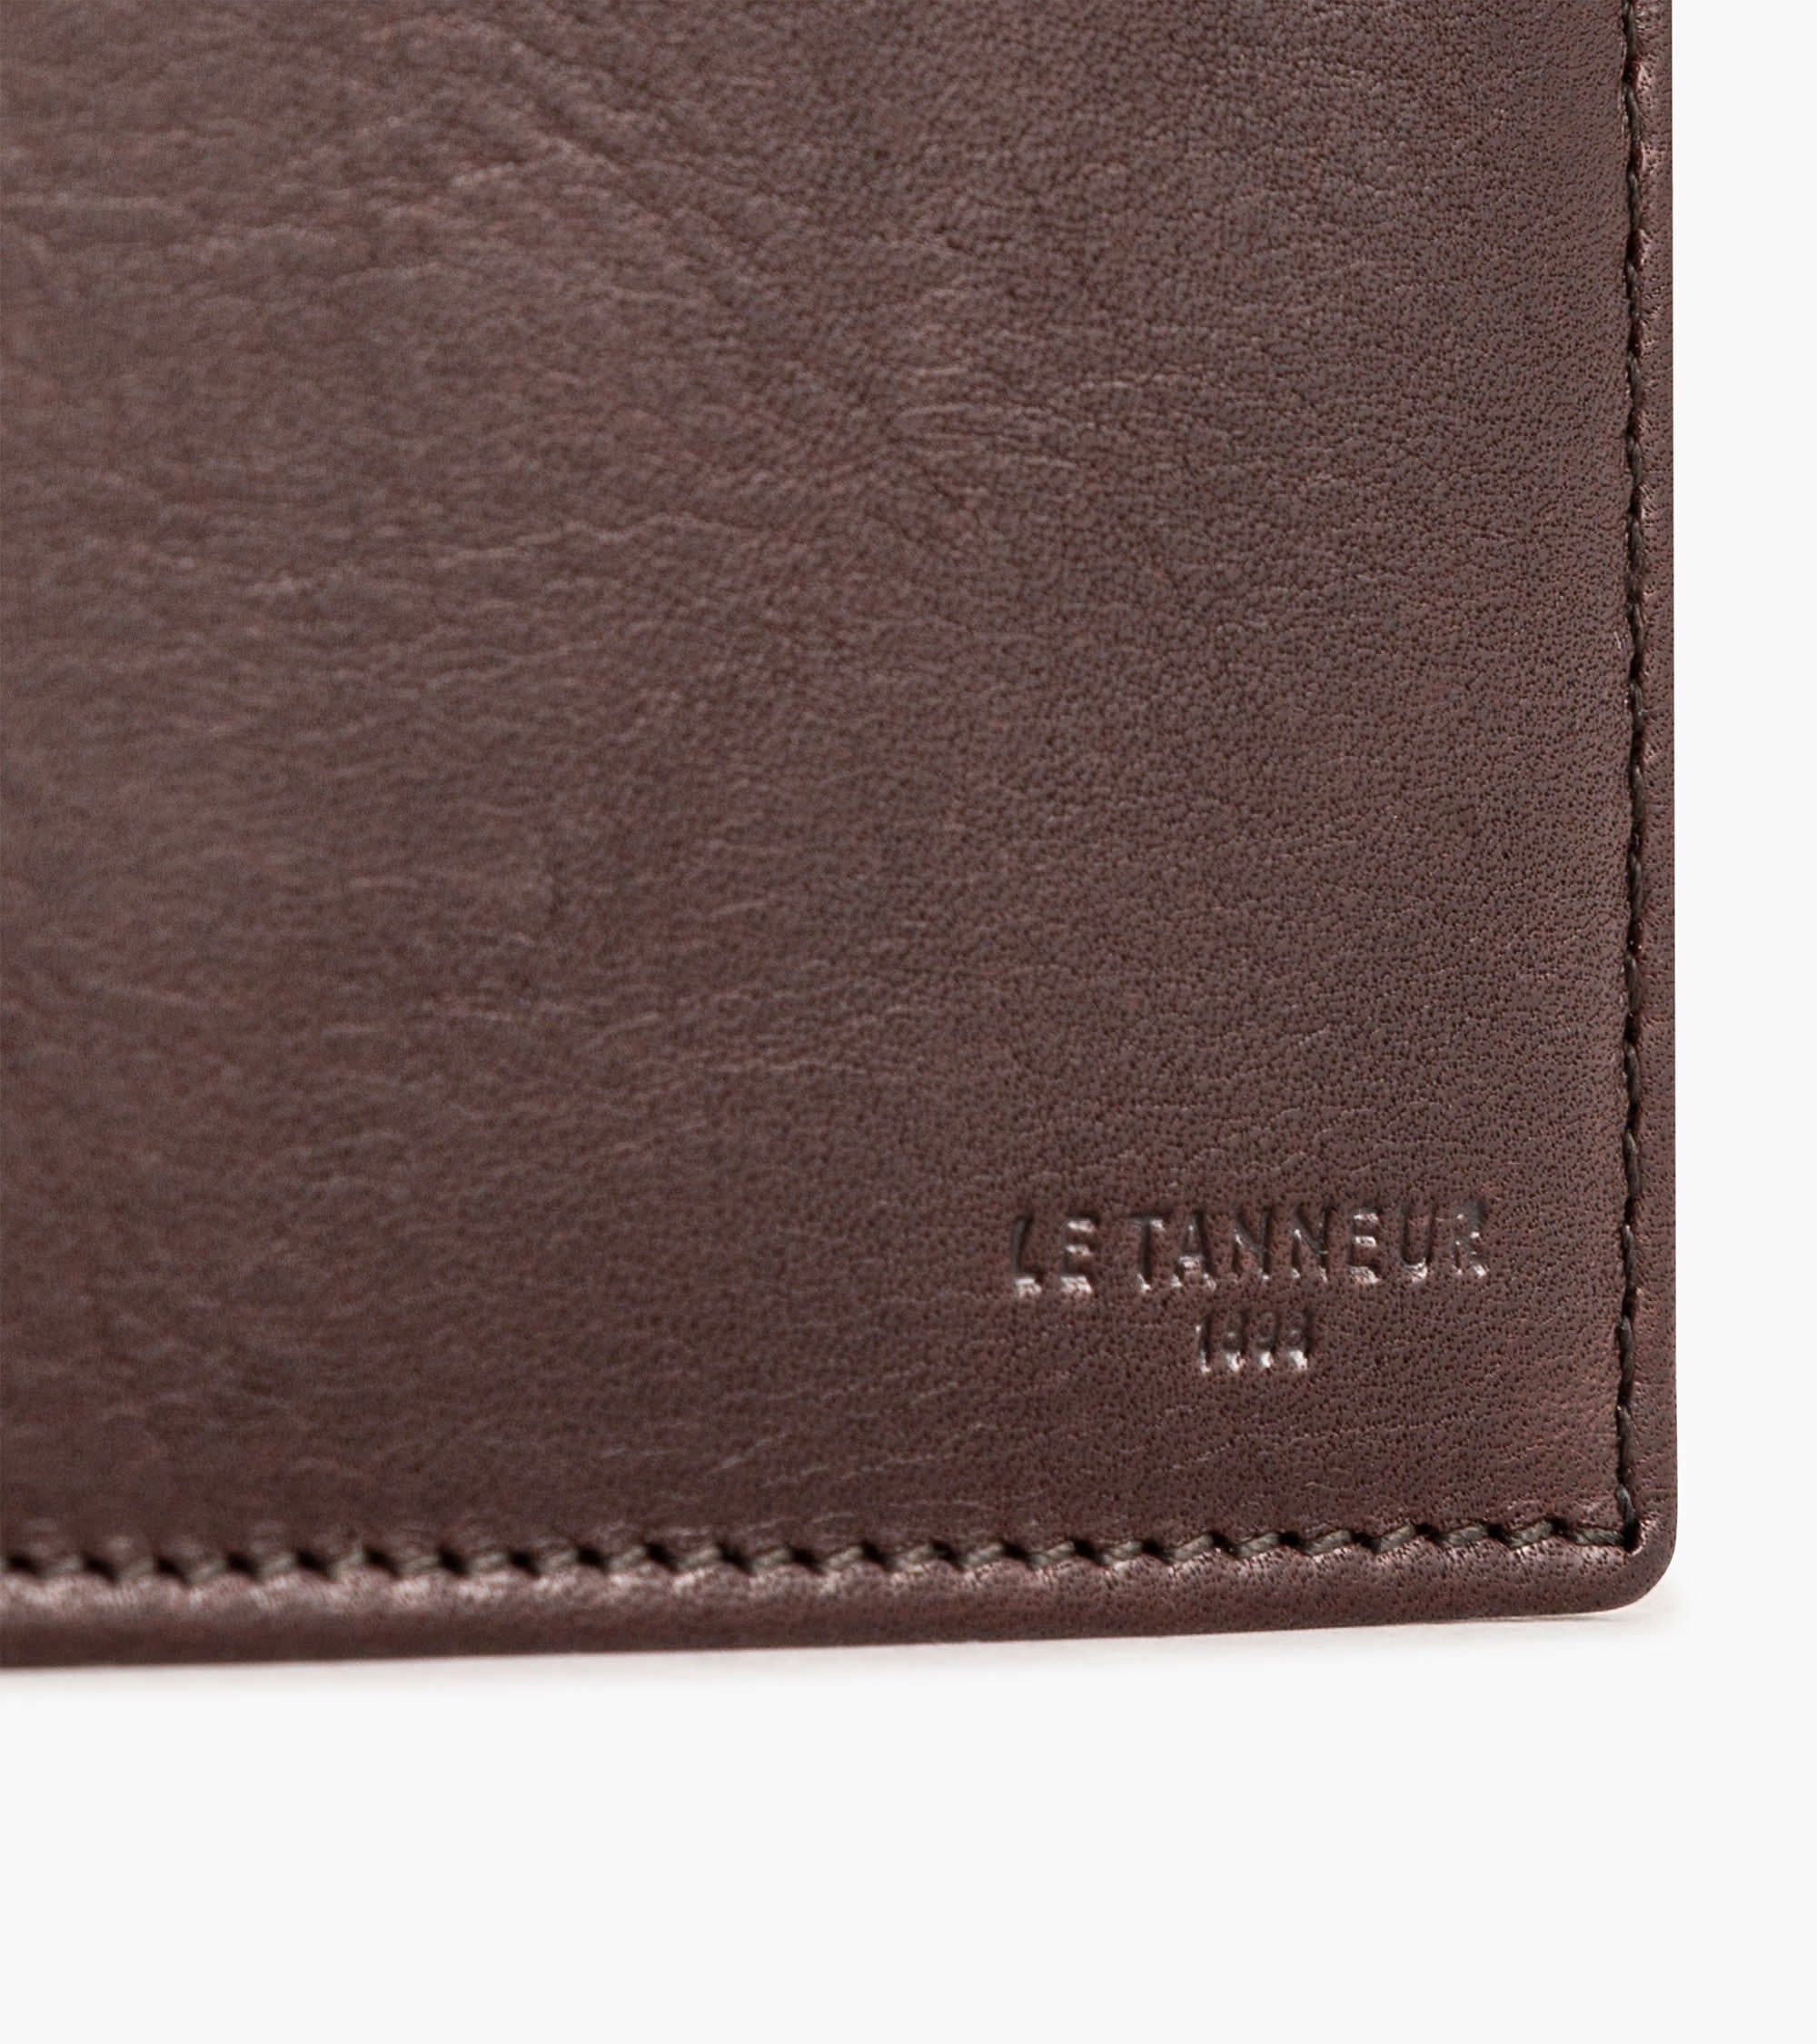 Gary horizontal zipped pocket wallet in oiled leather